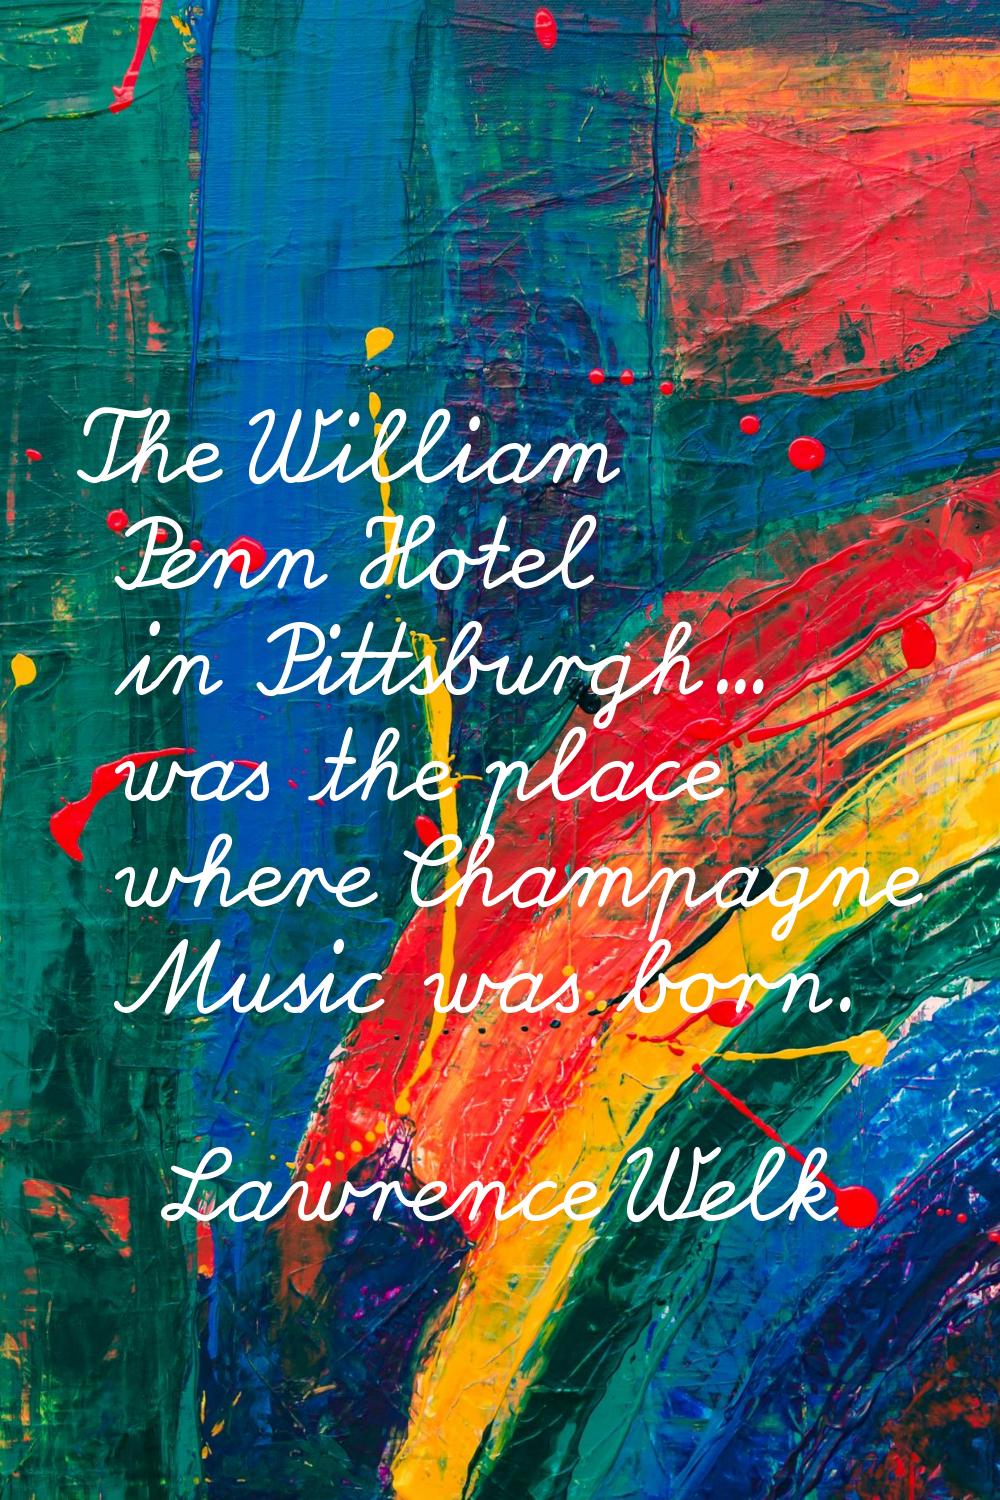 The William Penn Hotel in Pittsburgh... was the place where Champagne Music was born.